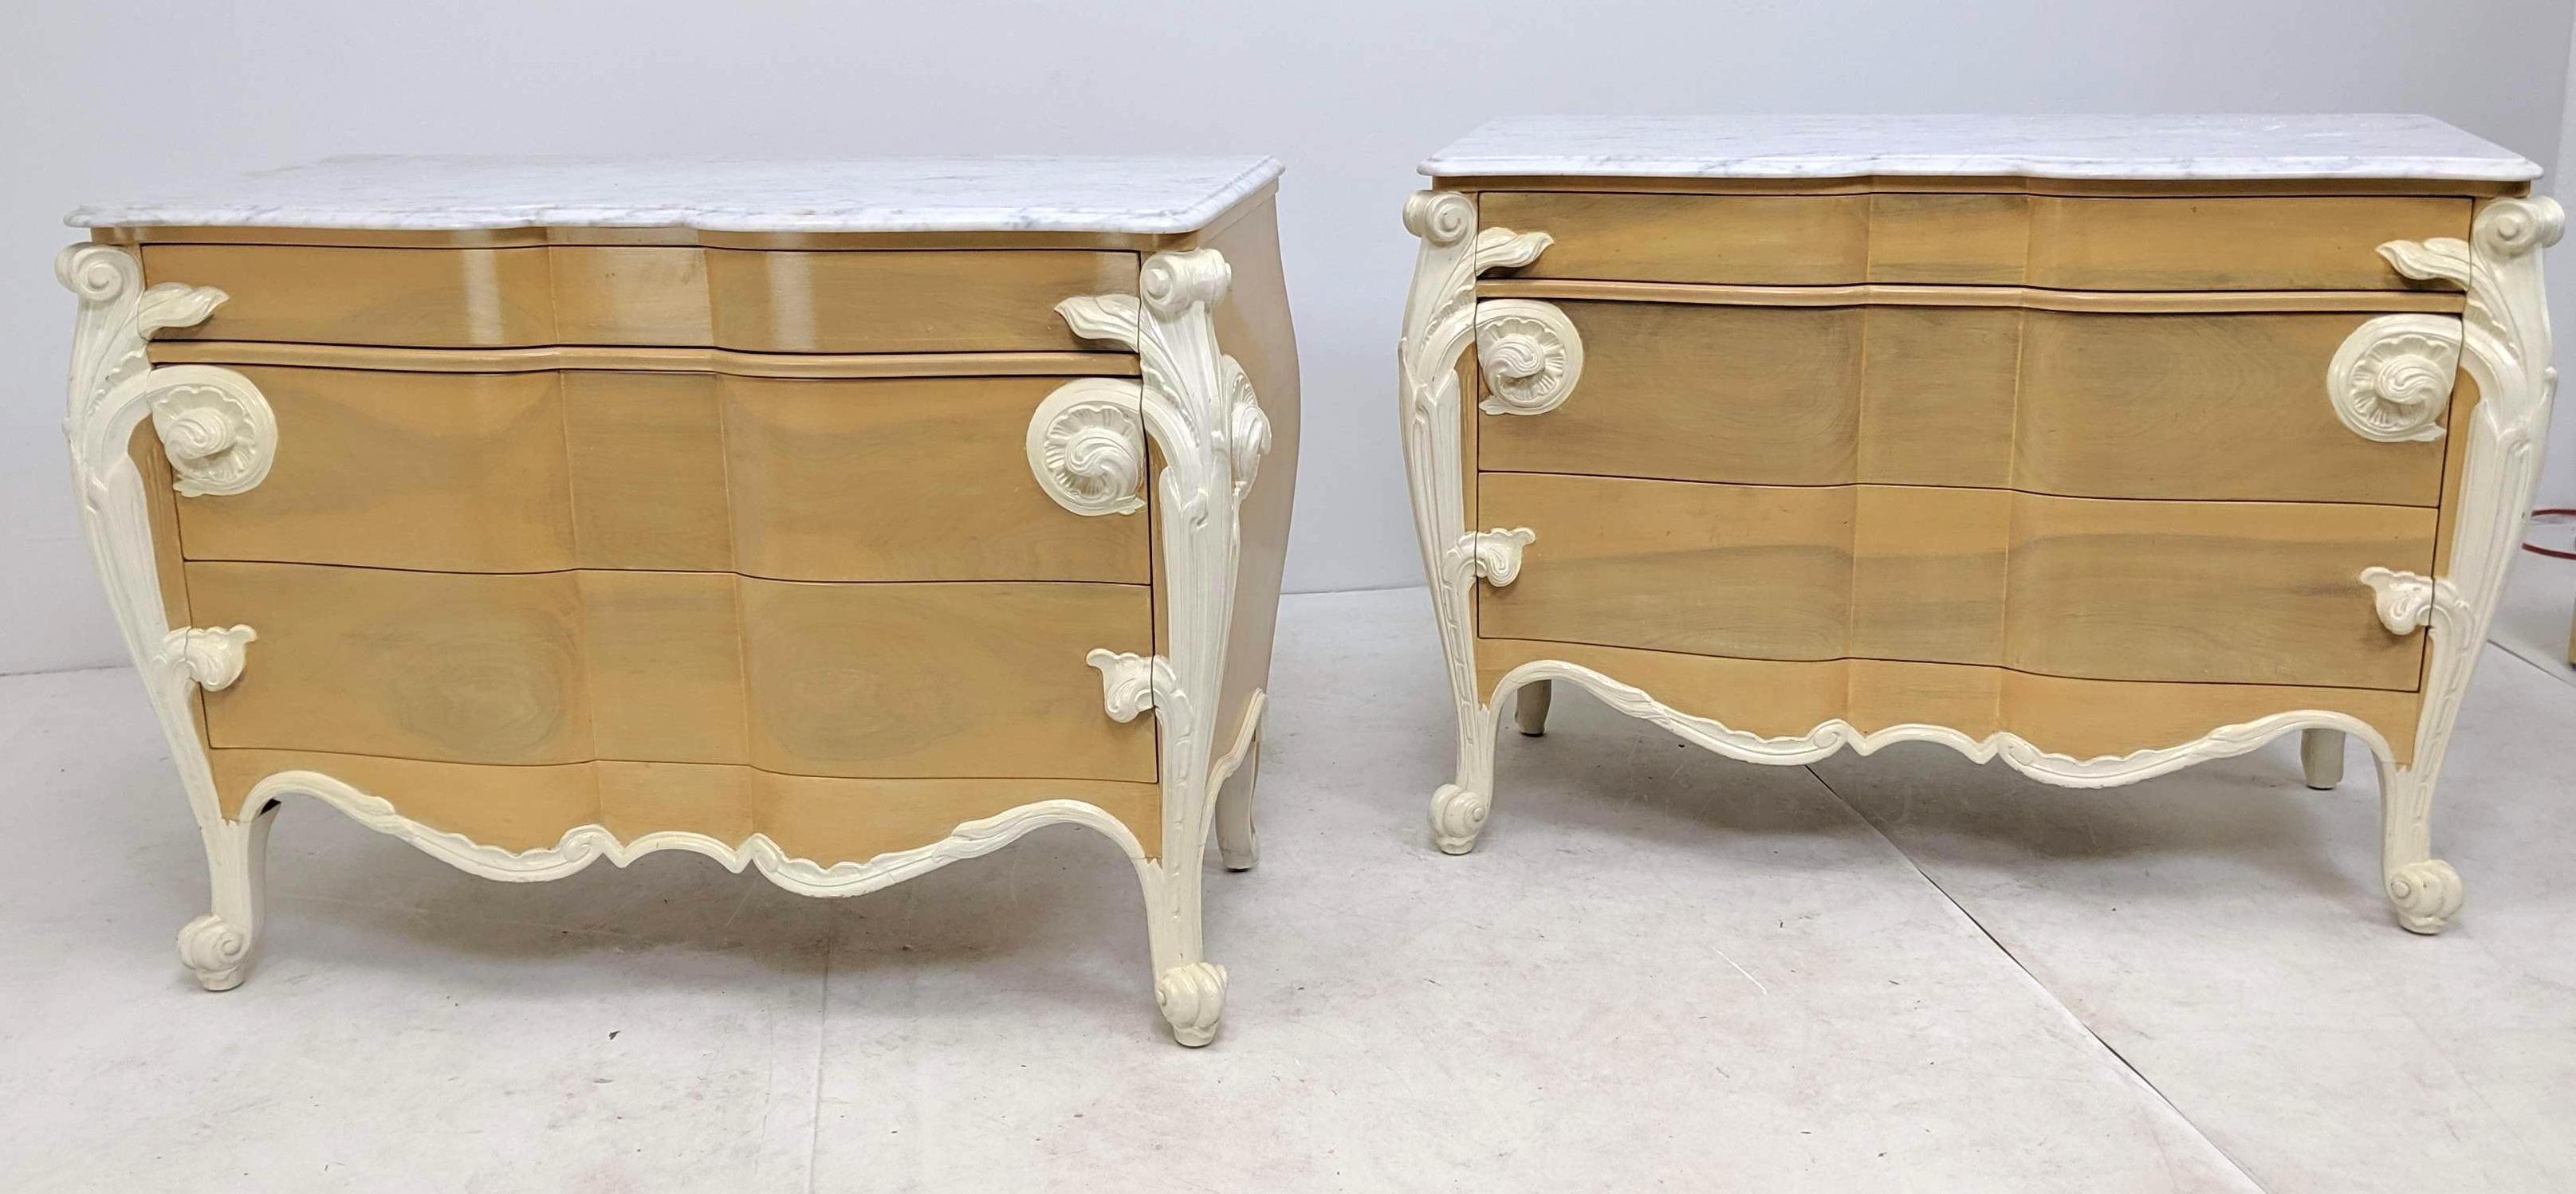 Casaragi marble-top commodes or dressers. Decorator French Louis XV style marble top bachelor chests bedside stands. Each having a white and gray veined marble top over three large serpentine drawers. Dressers having a rich carved Art Nouveau scroll